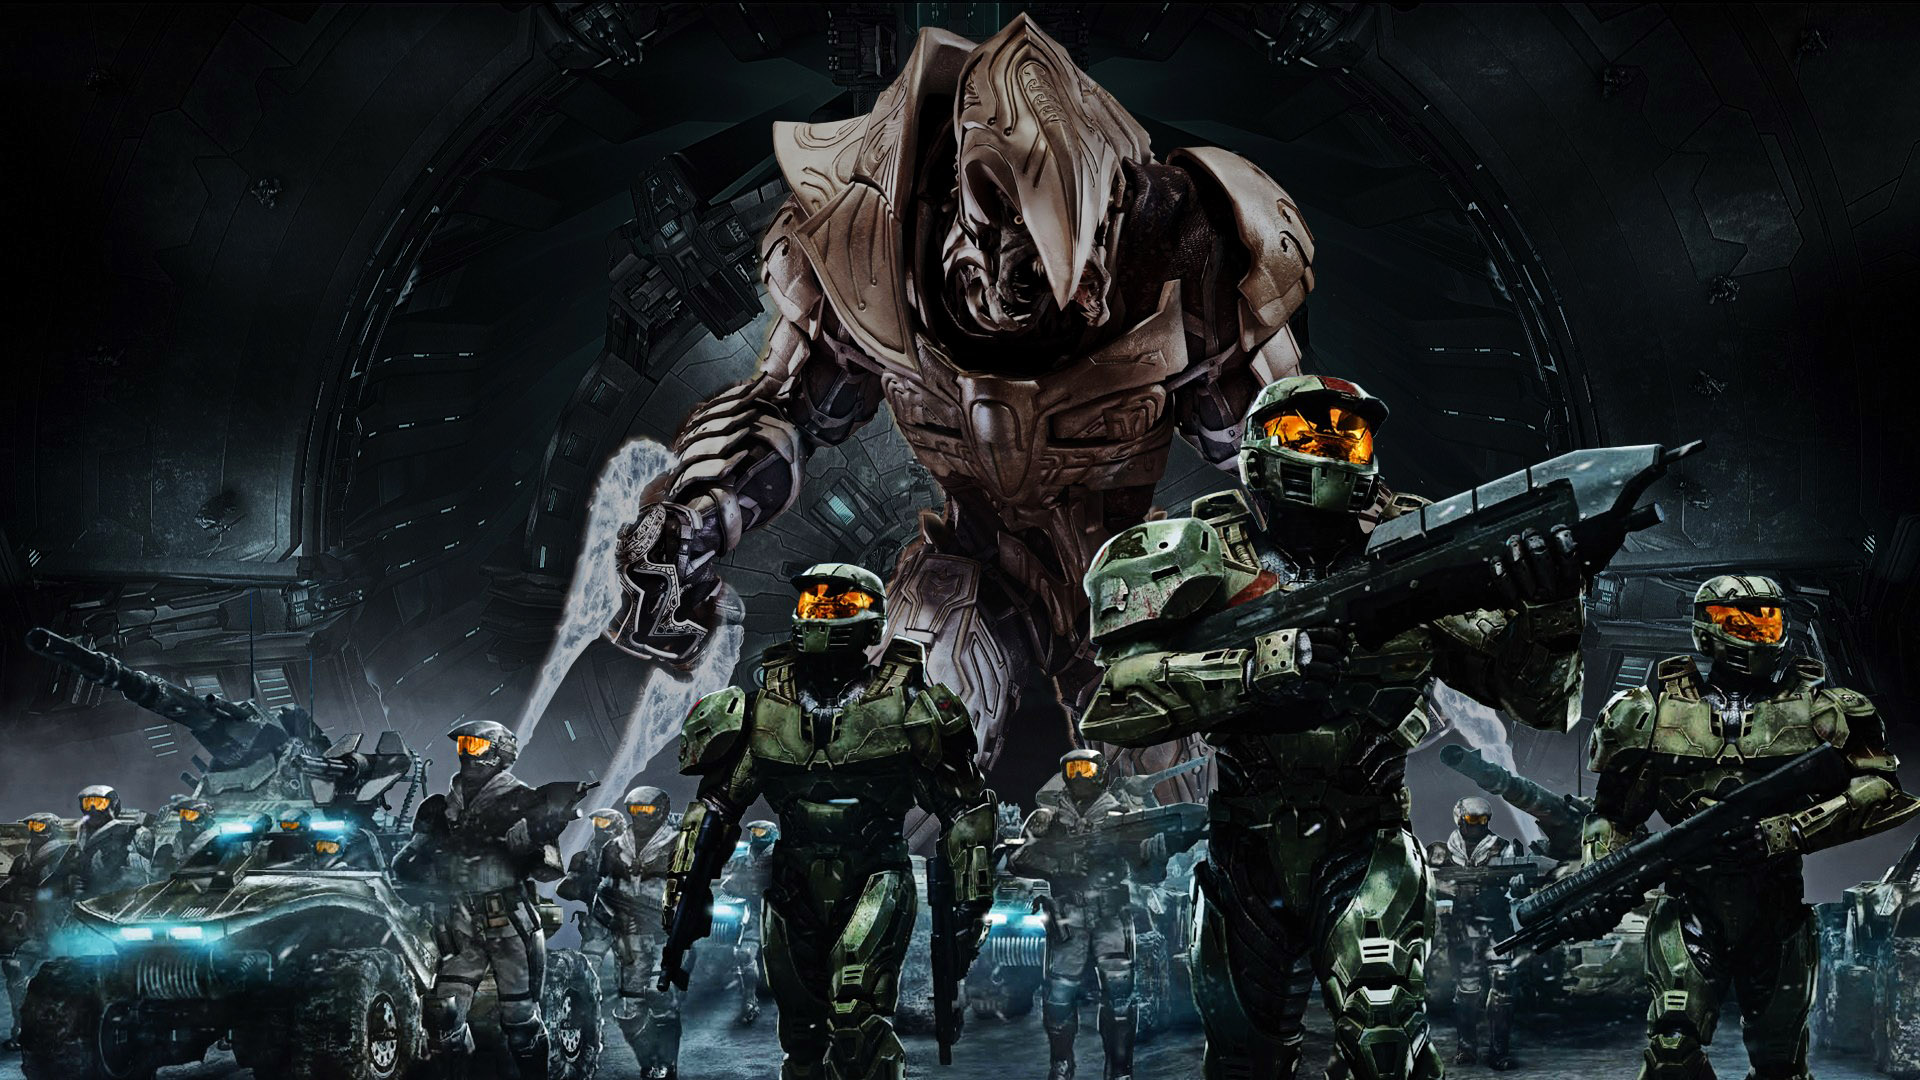 Image Cool Halo Army HD Wallpaper Jpg Nation The